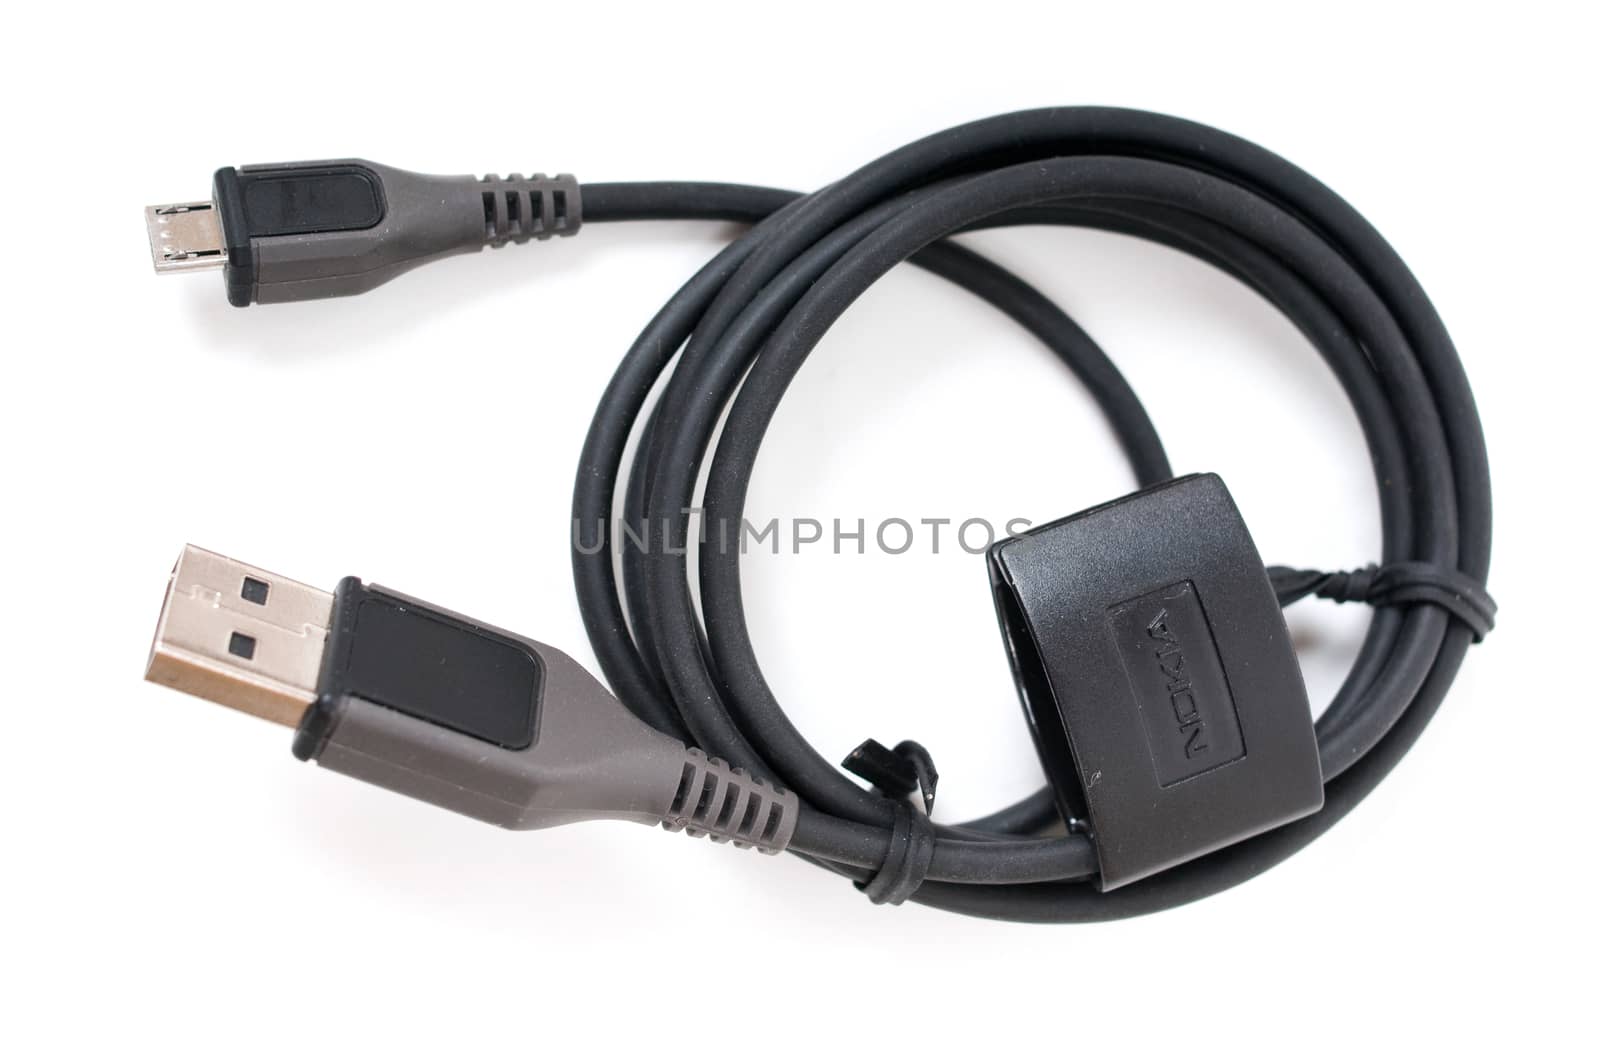 usb to micro-usb cable isolated on white background